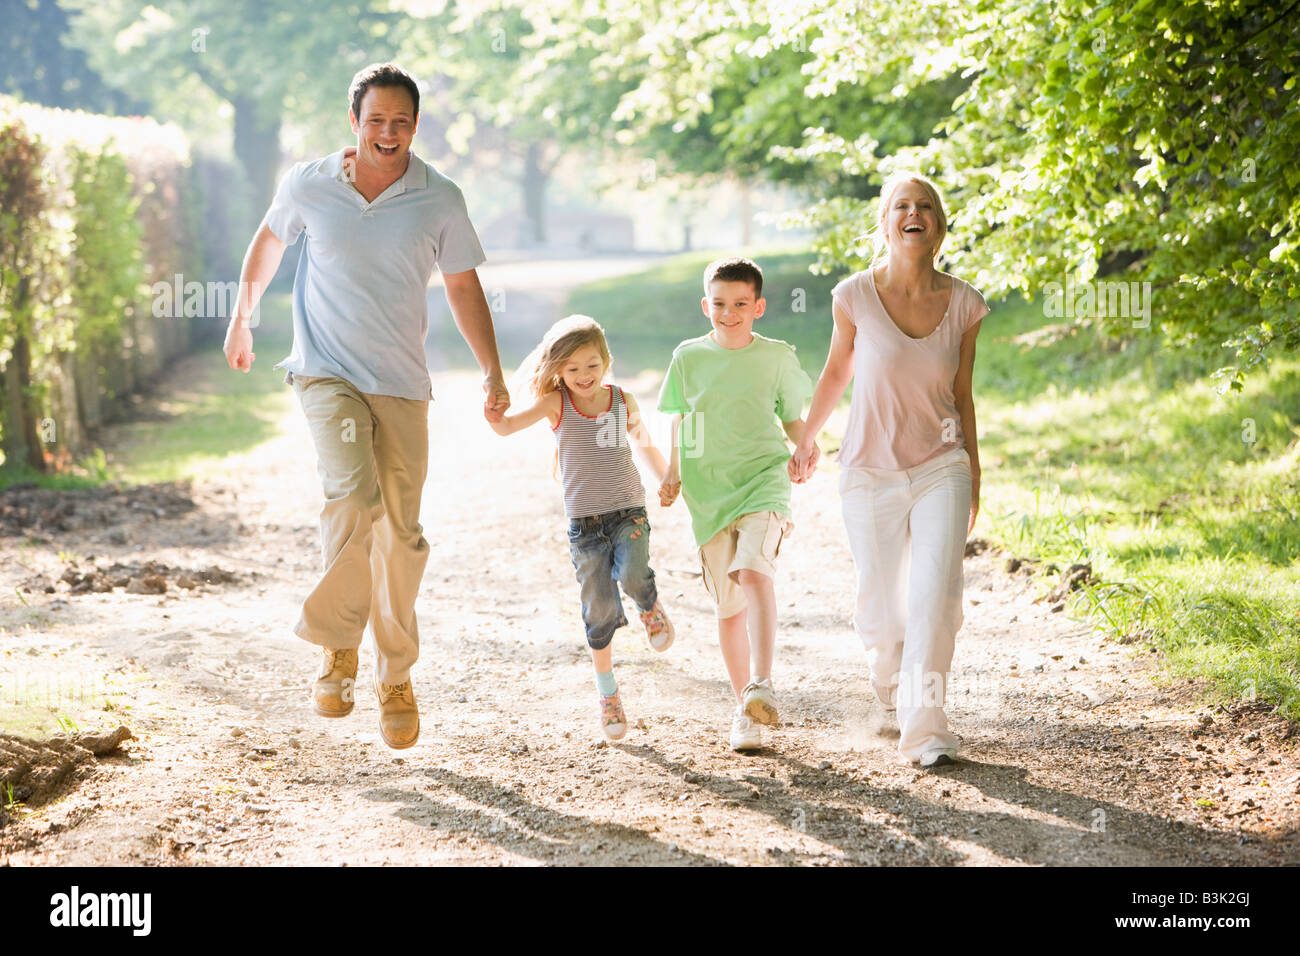 Family running outdoors holding hands and smiling Stock Photo